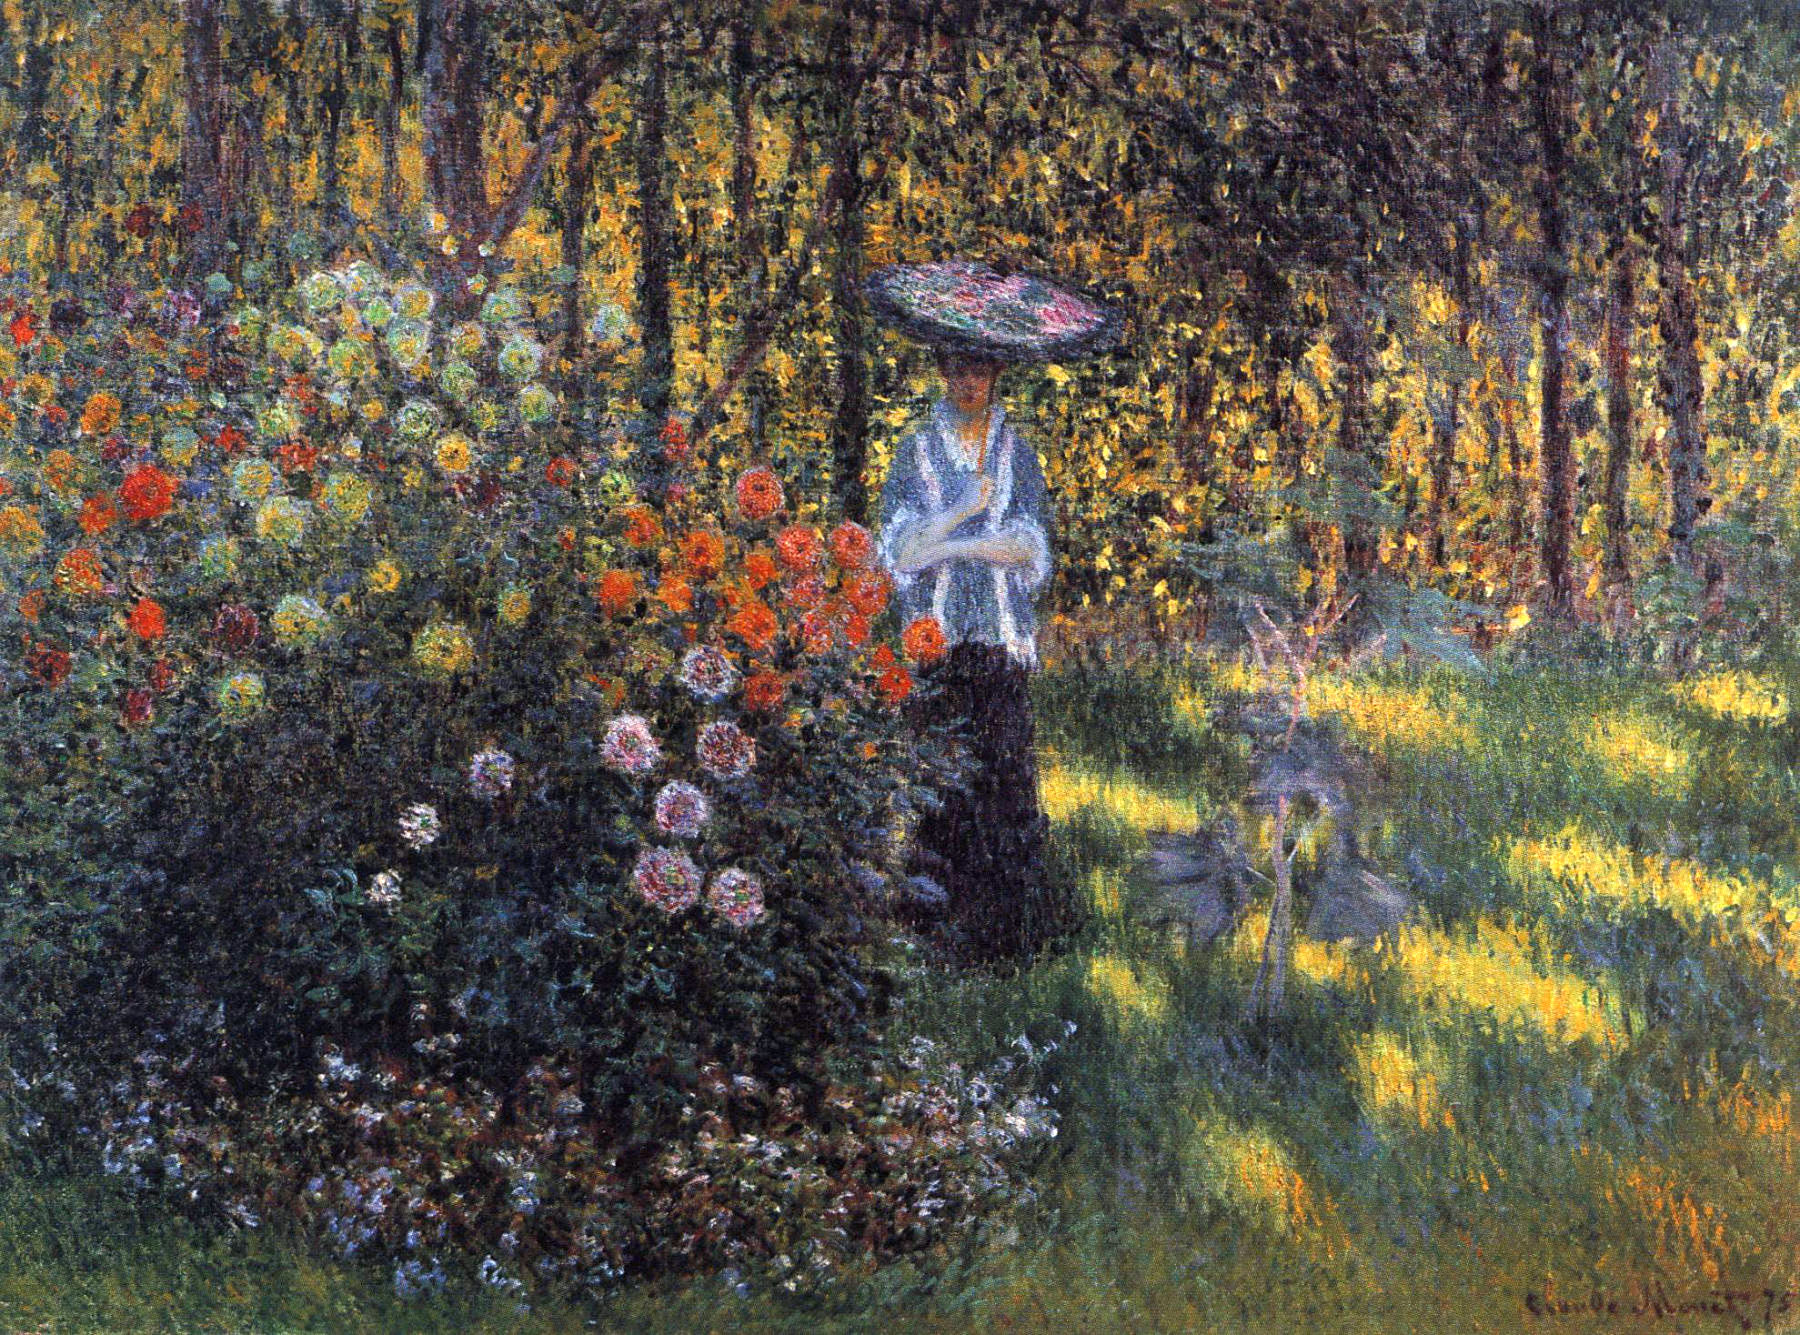 Image of Woman with Parasol in a Garden.